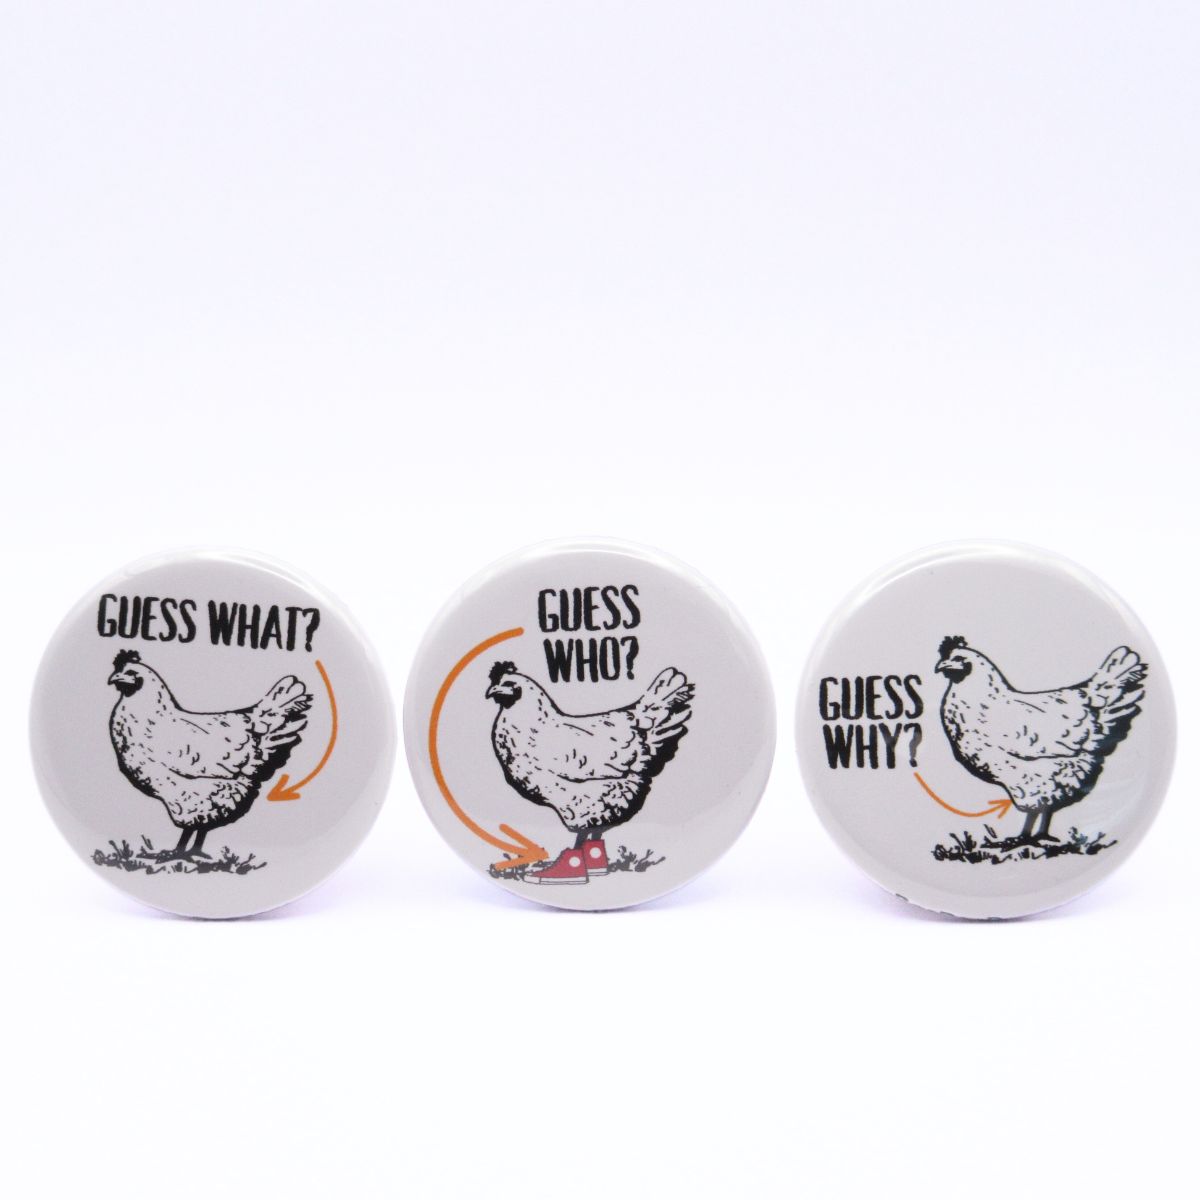 BooBooRoo Pinback Button (i.e. button, badge, pin) for the Guess What Chicken Butt, Guess Why Chicken Thigh, and Guess Who Chicken Shoe three-button pack